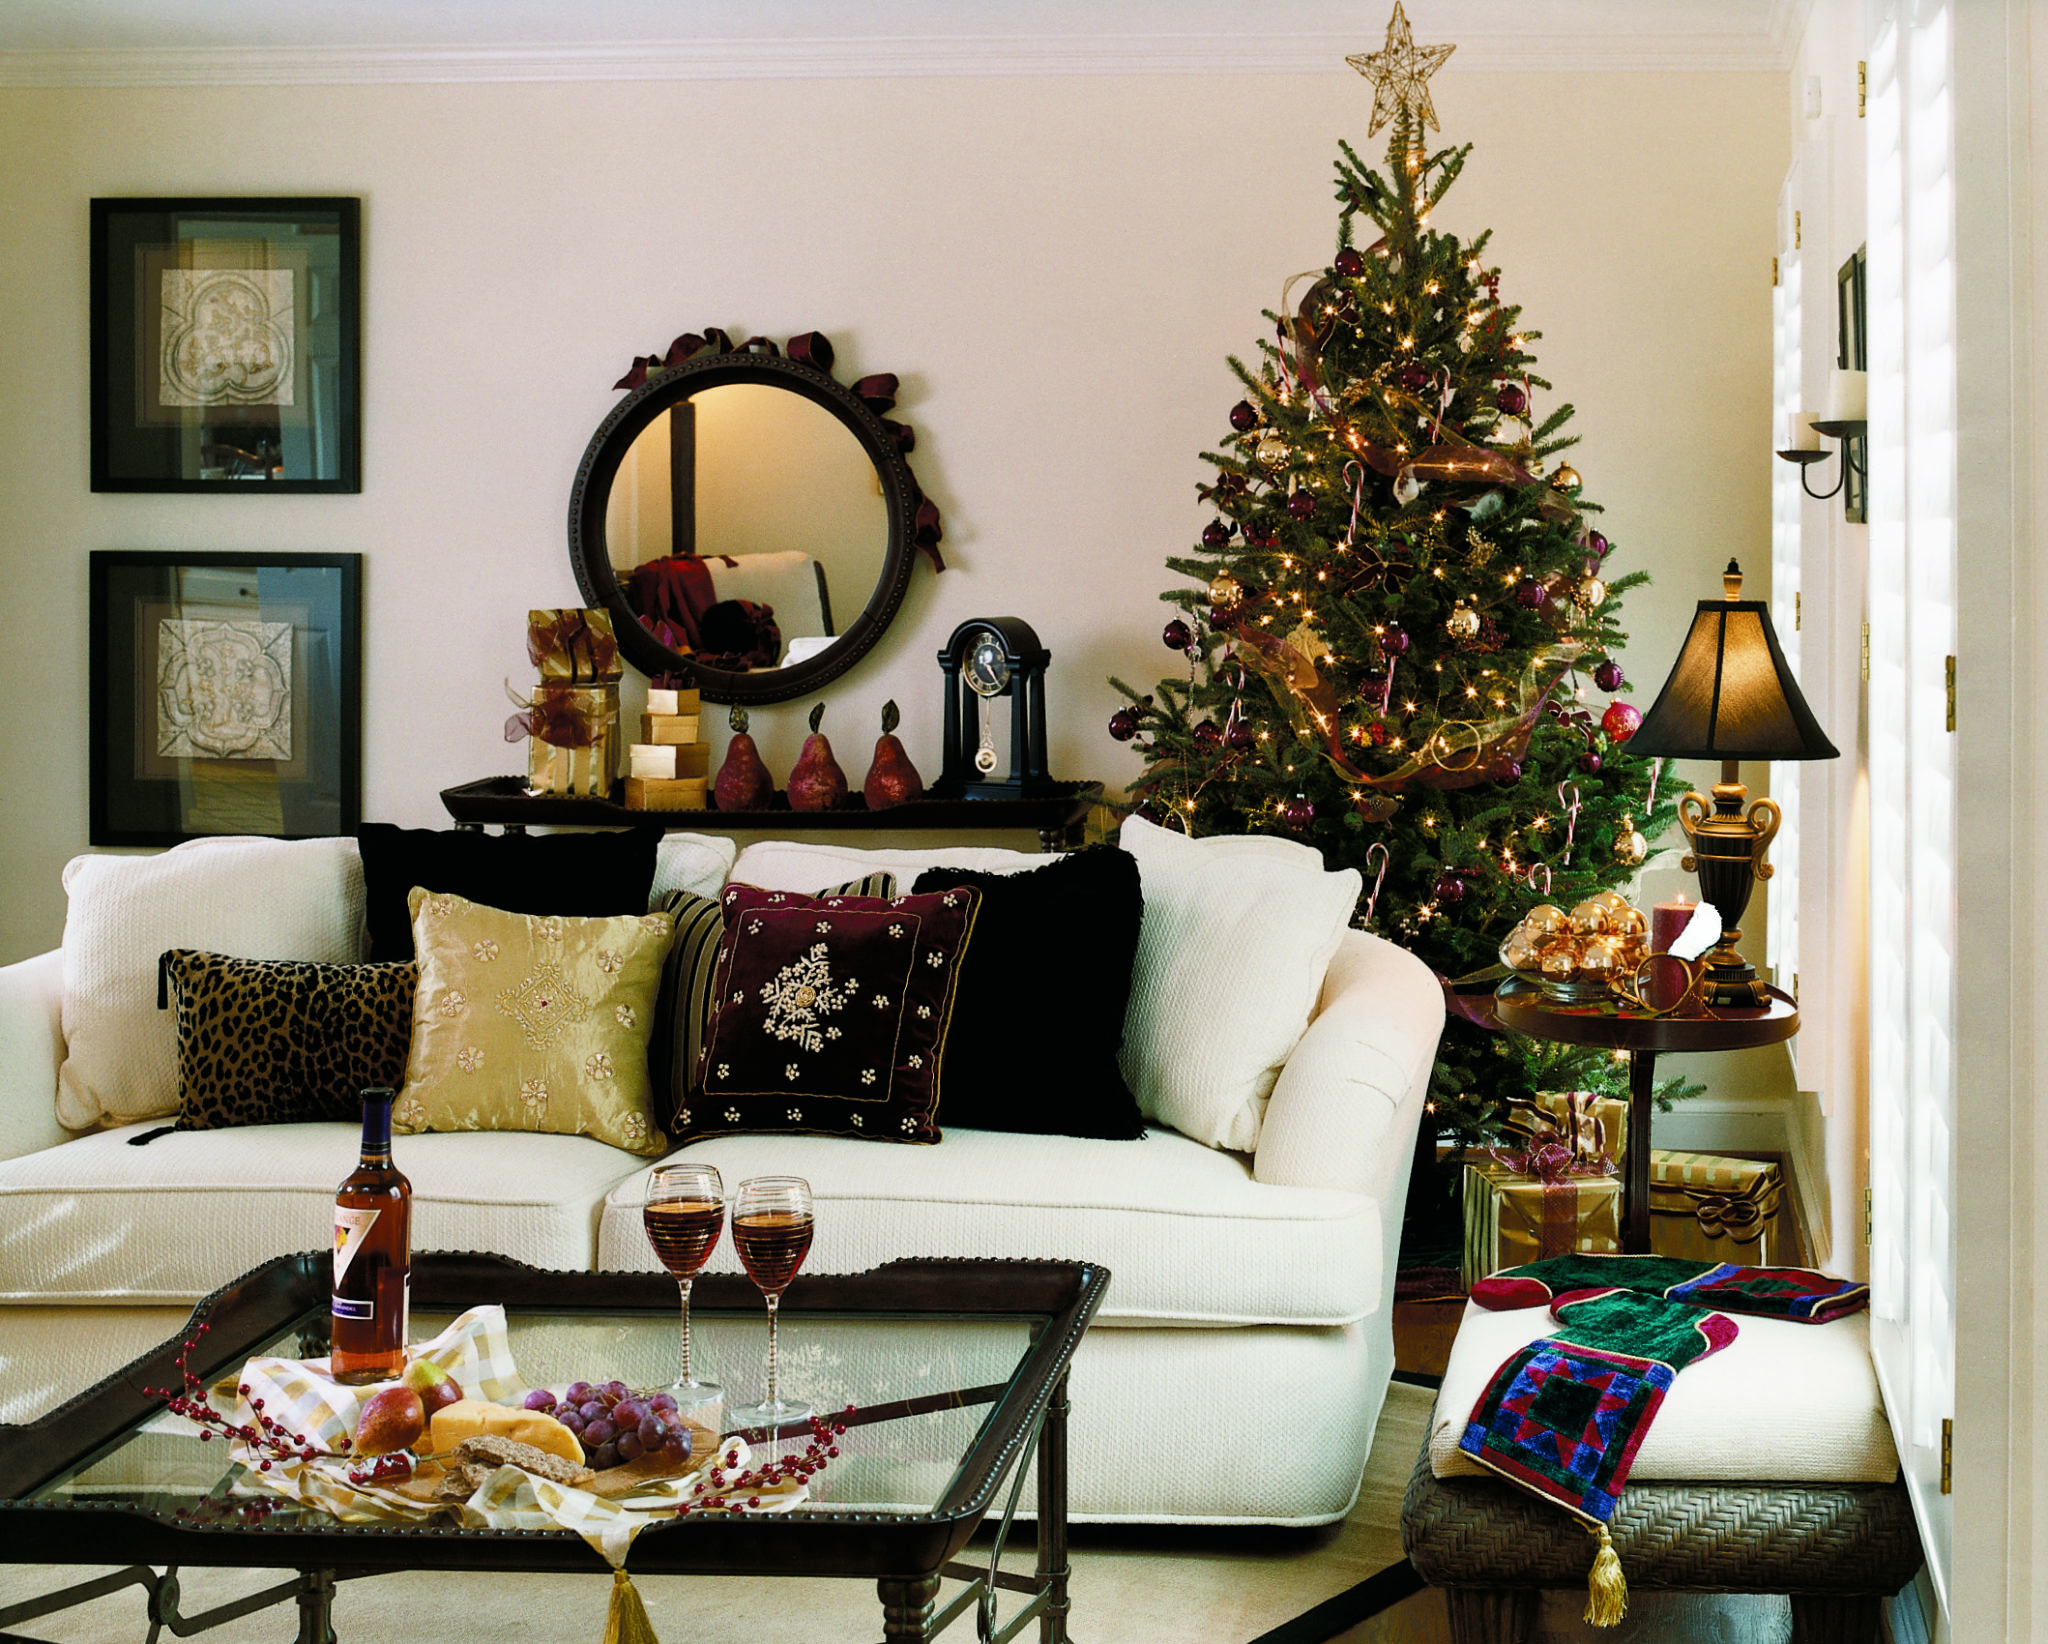 Prepping your home for the 2020 holiday season